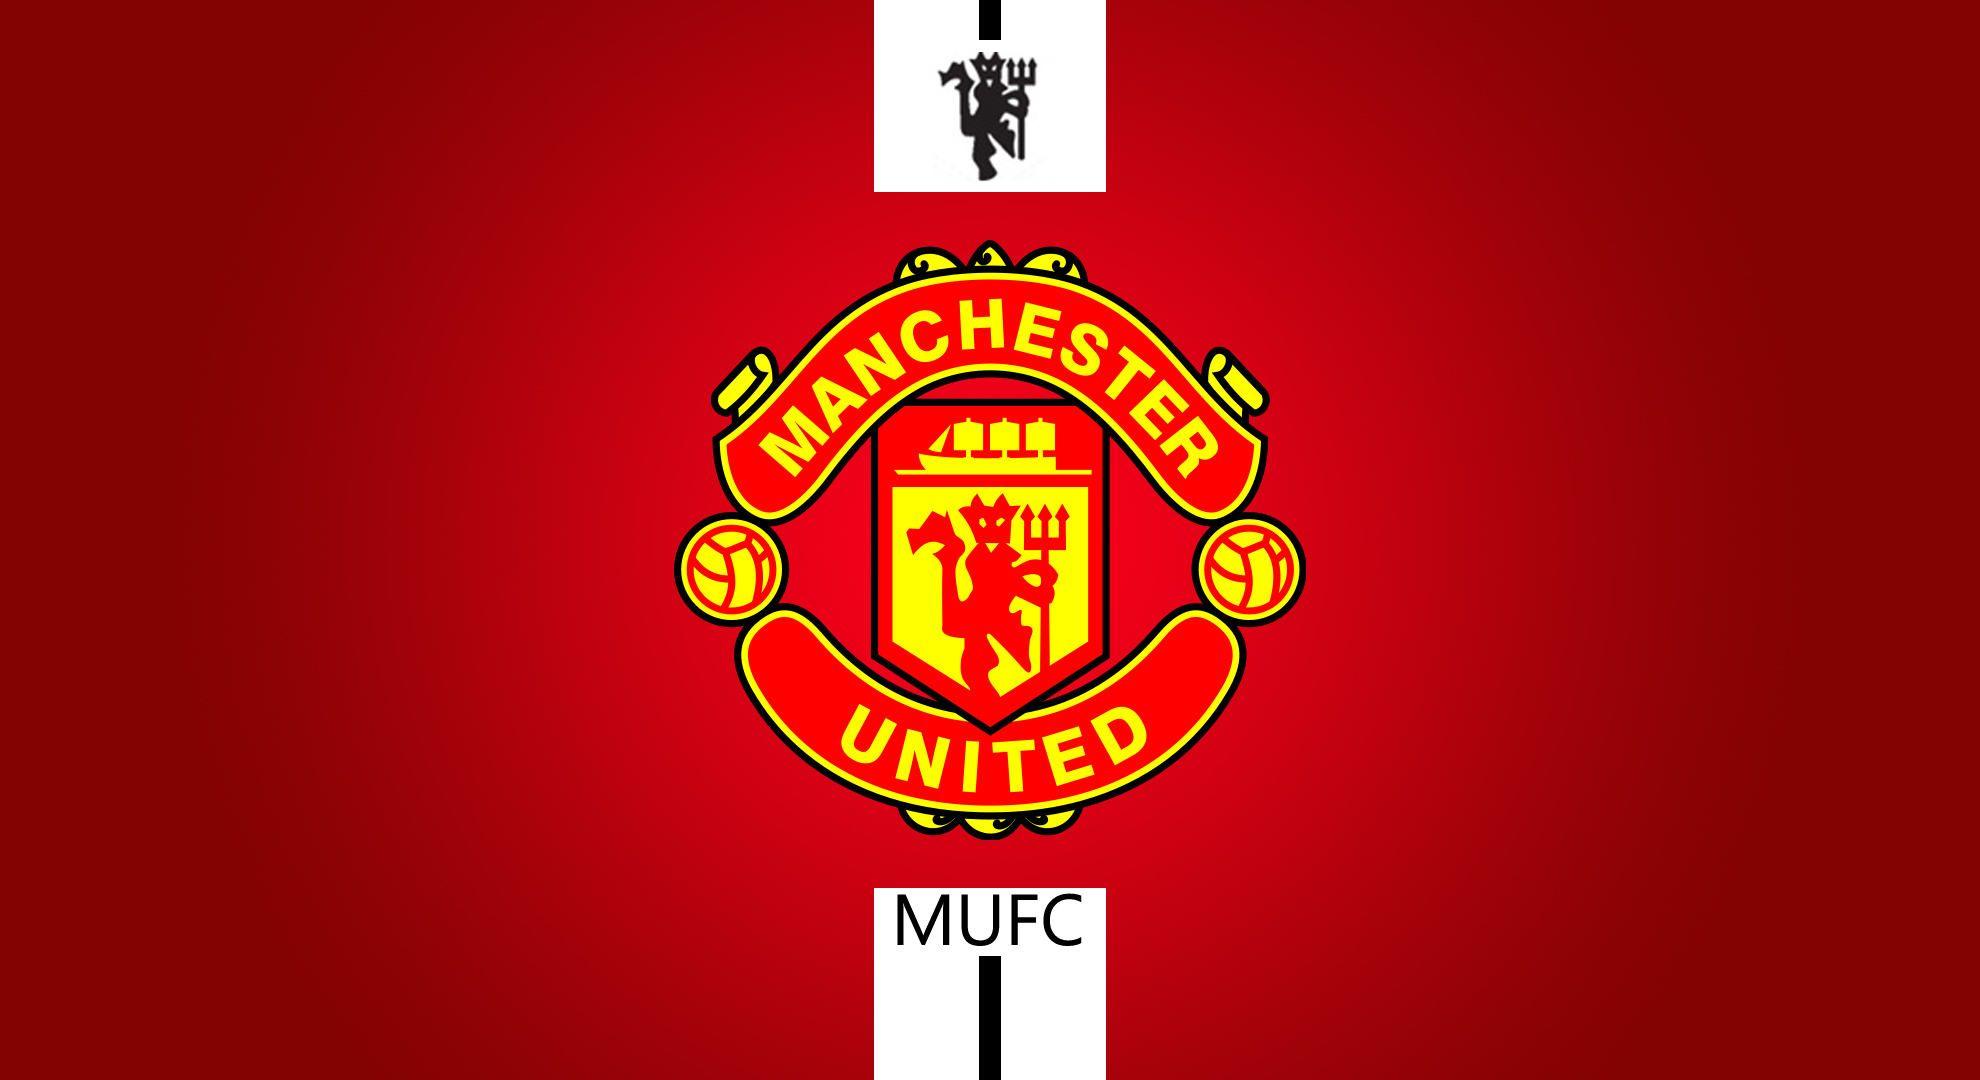 Great Logo Manchester United The Red Devil HD Wallpaper 8. PL